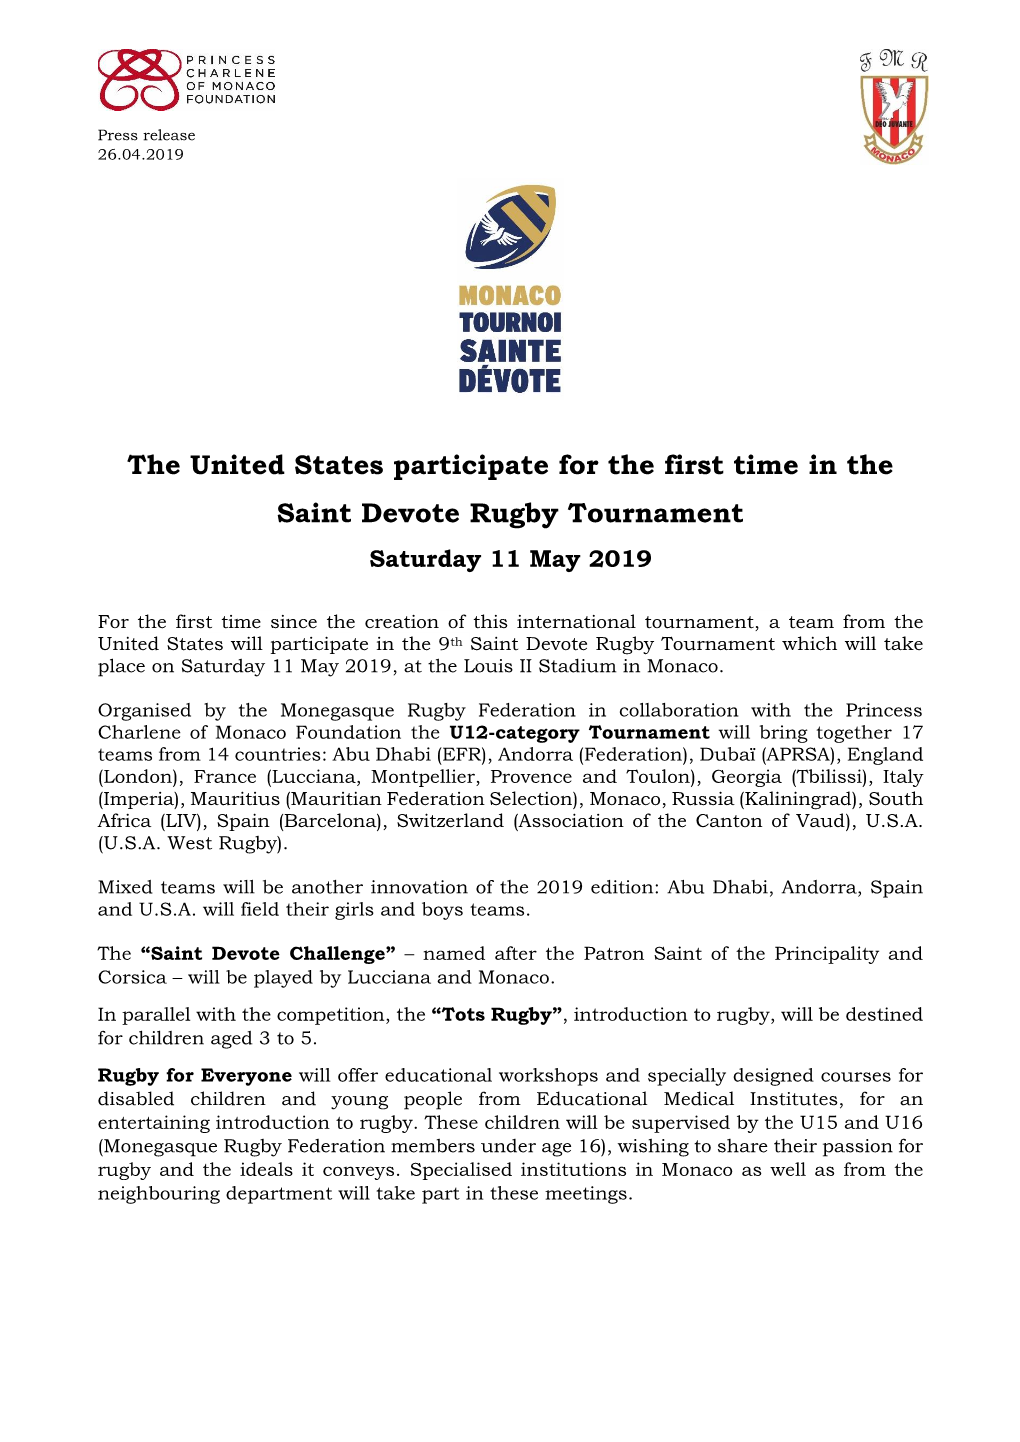 The United States Participate for the First Time in the Saint Devote Rugby Tournament Saturday 11 May 2019